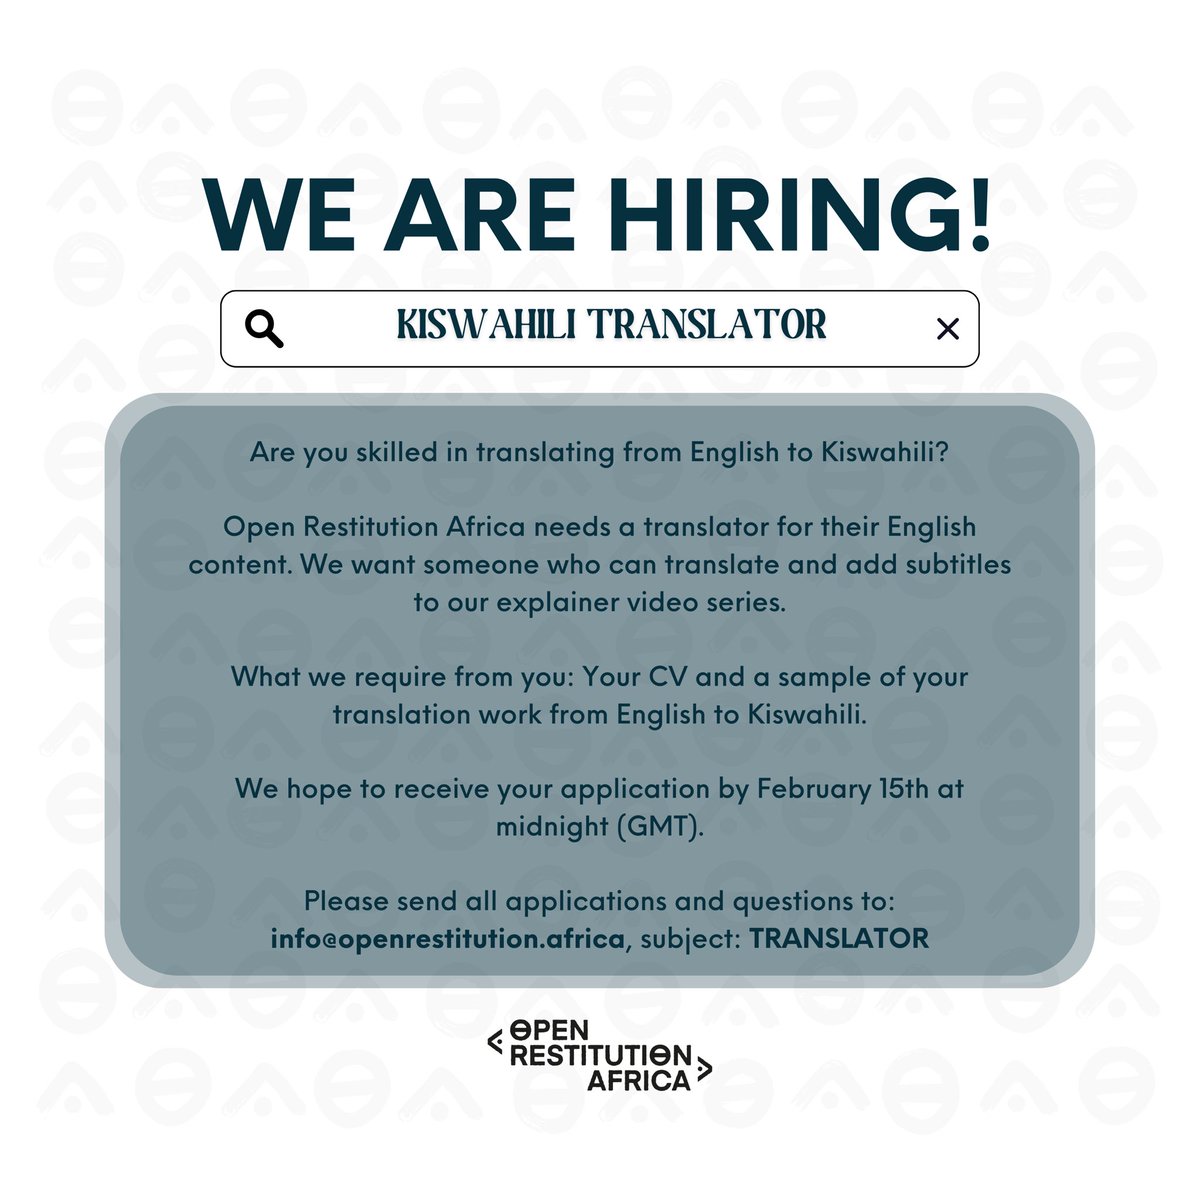 We are seeking a skilled English to Kiswahili translator to add subtitles to our explainer video series. To apply, send your CV and a sample of your work to info@openrestitution.africa (subject: TRANSLATOR) by February 15th, midnight (GMT)